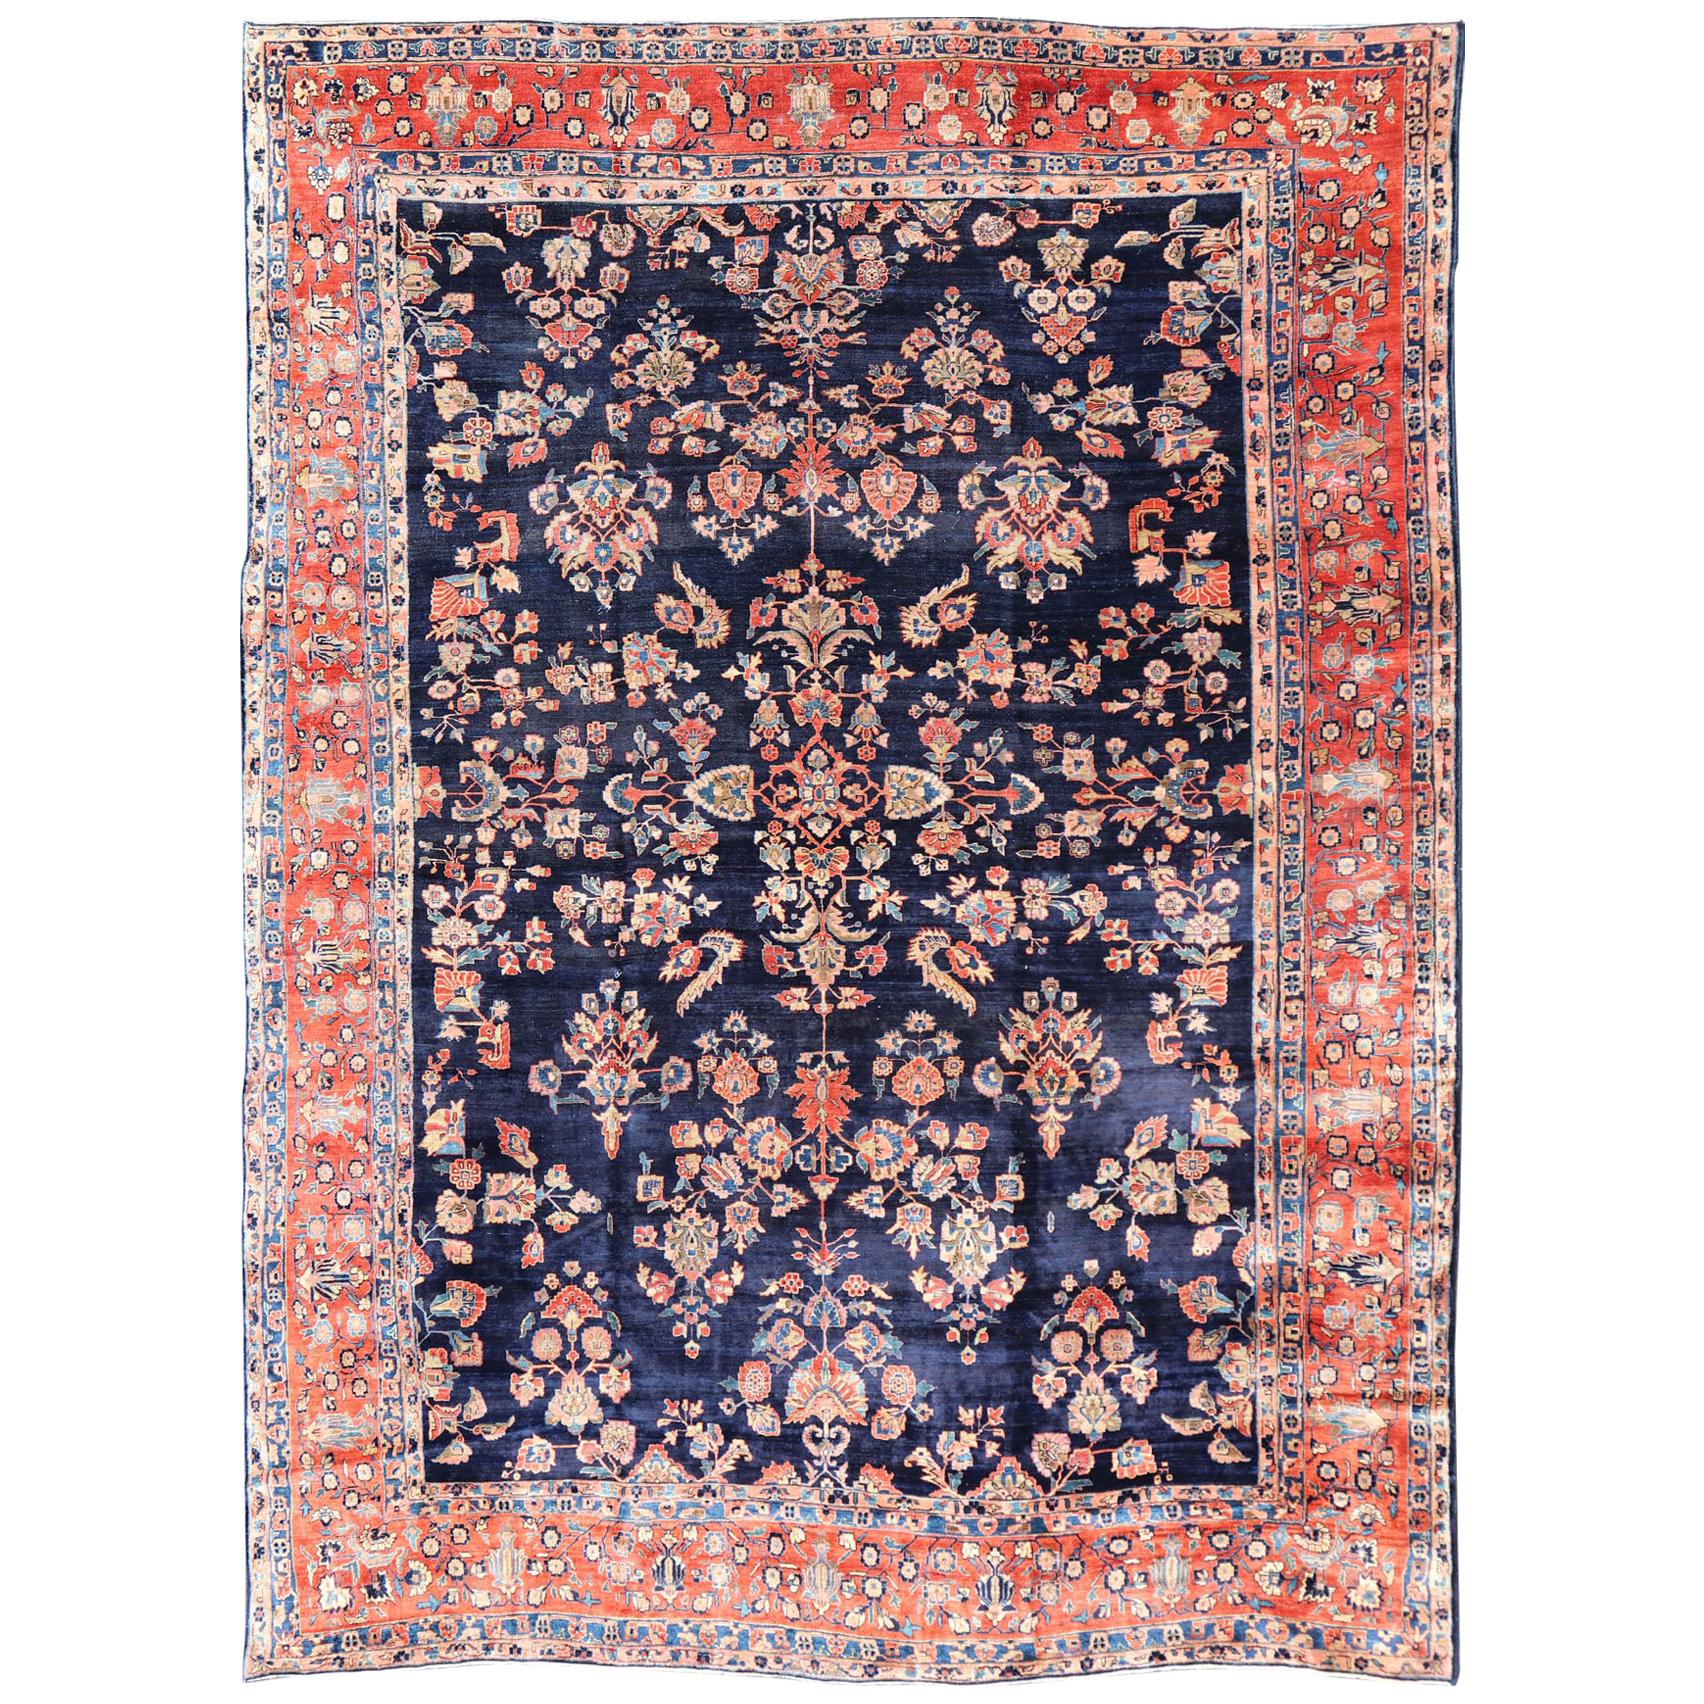 Antique Large Sarouk Faraghan Rug with Floral Pattern in Navy and Orange-Red